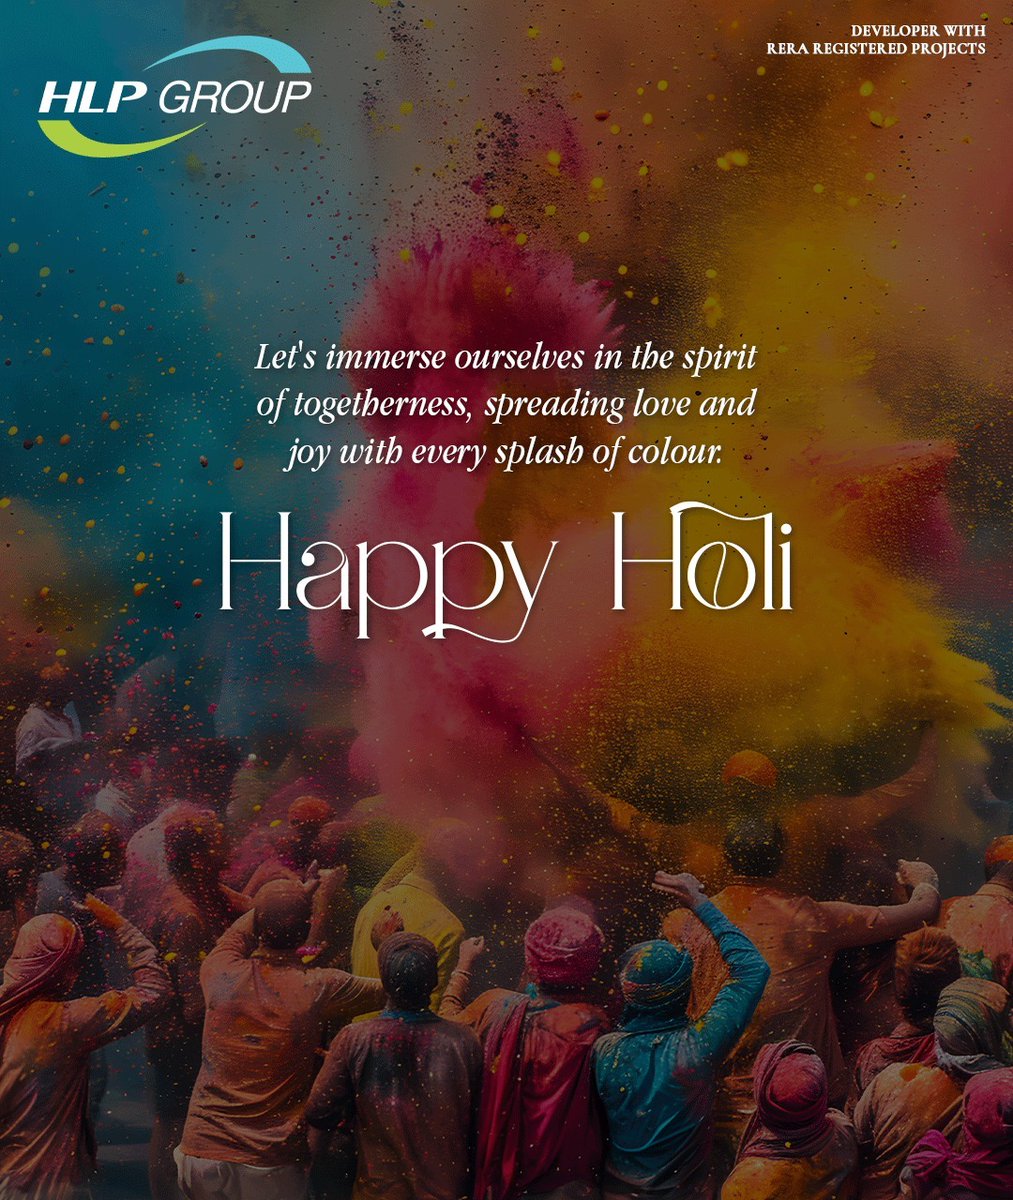 As you celebrate Holi, may the vibrant colours uplift your spirits, wipe away sorrows, and fill your world with laughter and love.
Happy Holi
#HLPGroup #HLPSocialSquare #HLPPalmillas #HLPGalleria #Togetherness #Colours #Joy #Laughter #Love  #SplashOfColours